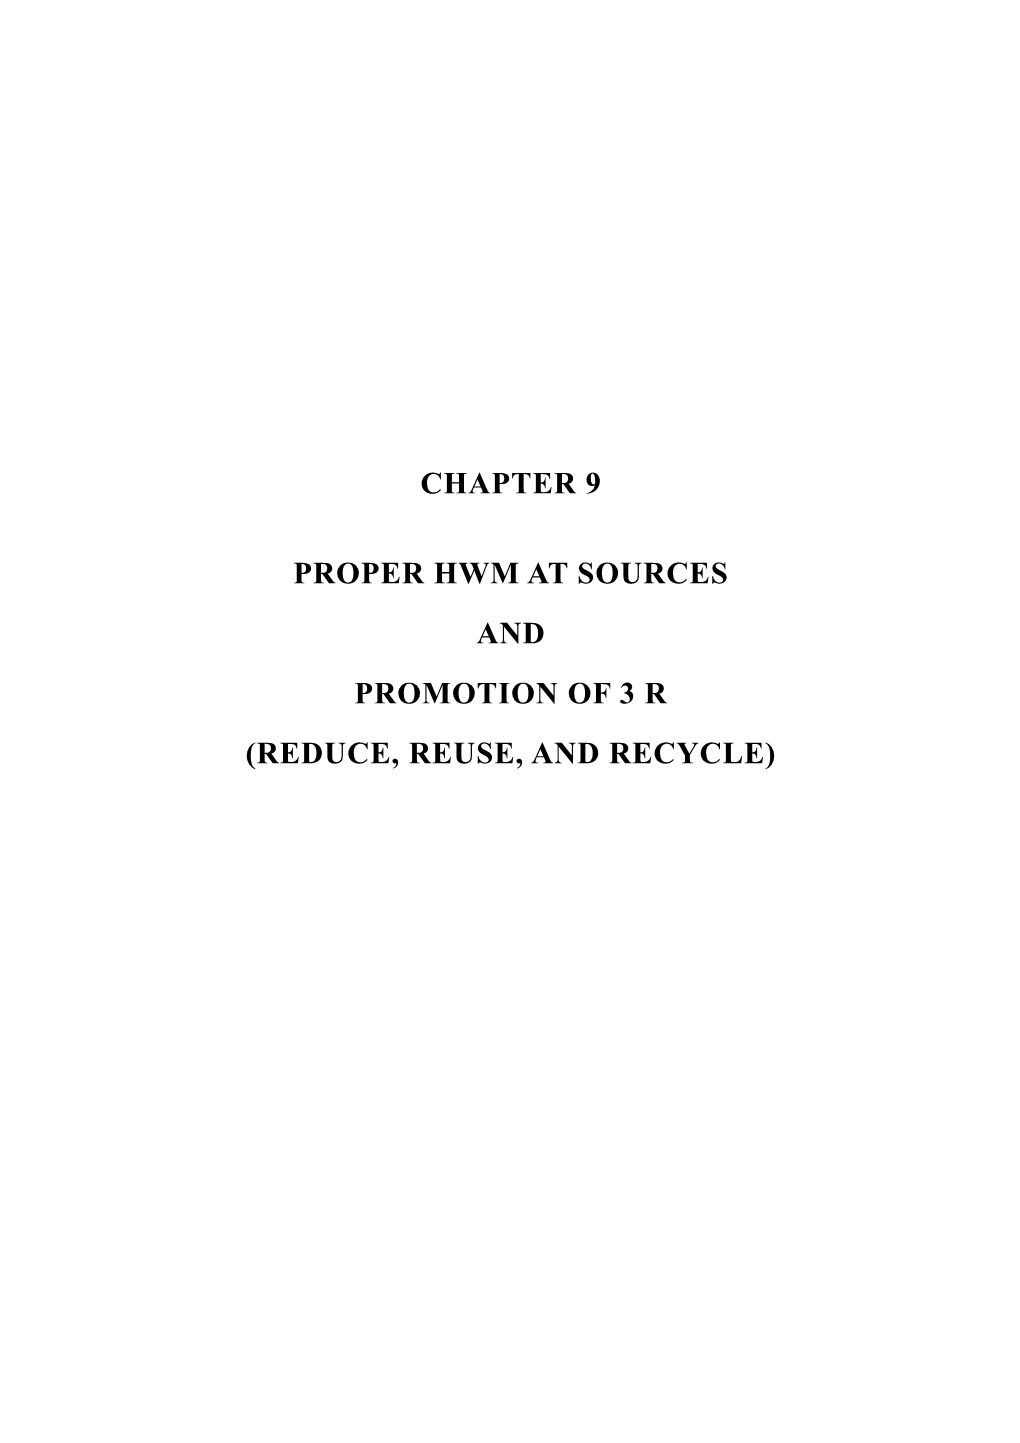 Chapter 9 Proper Hwm at Sources and Promotion of 3